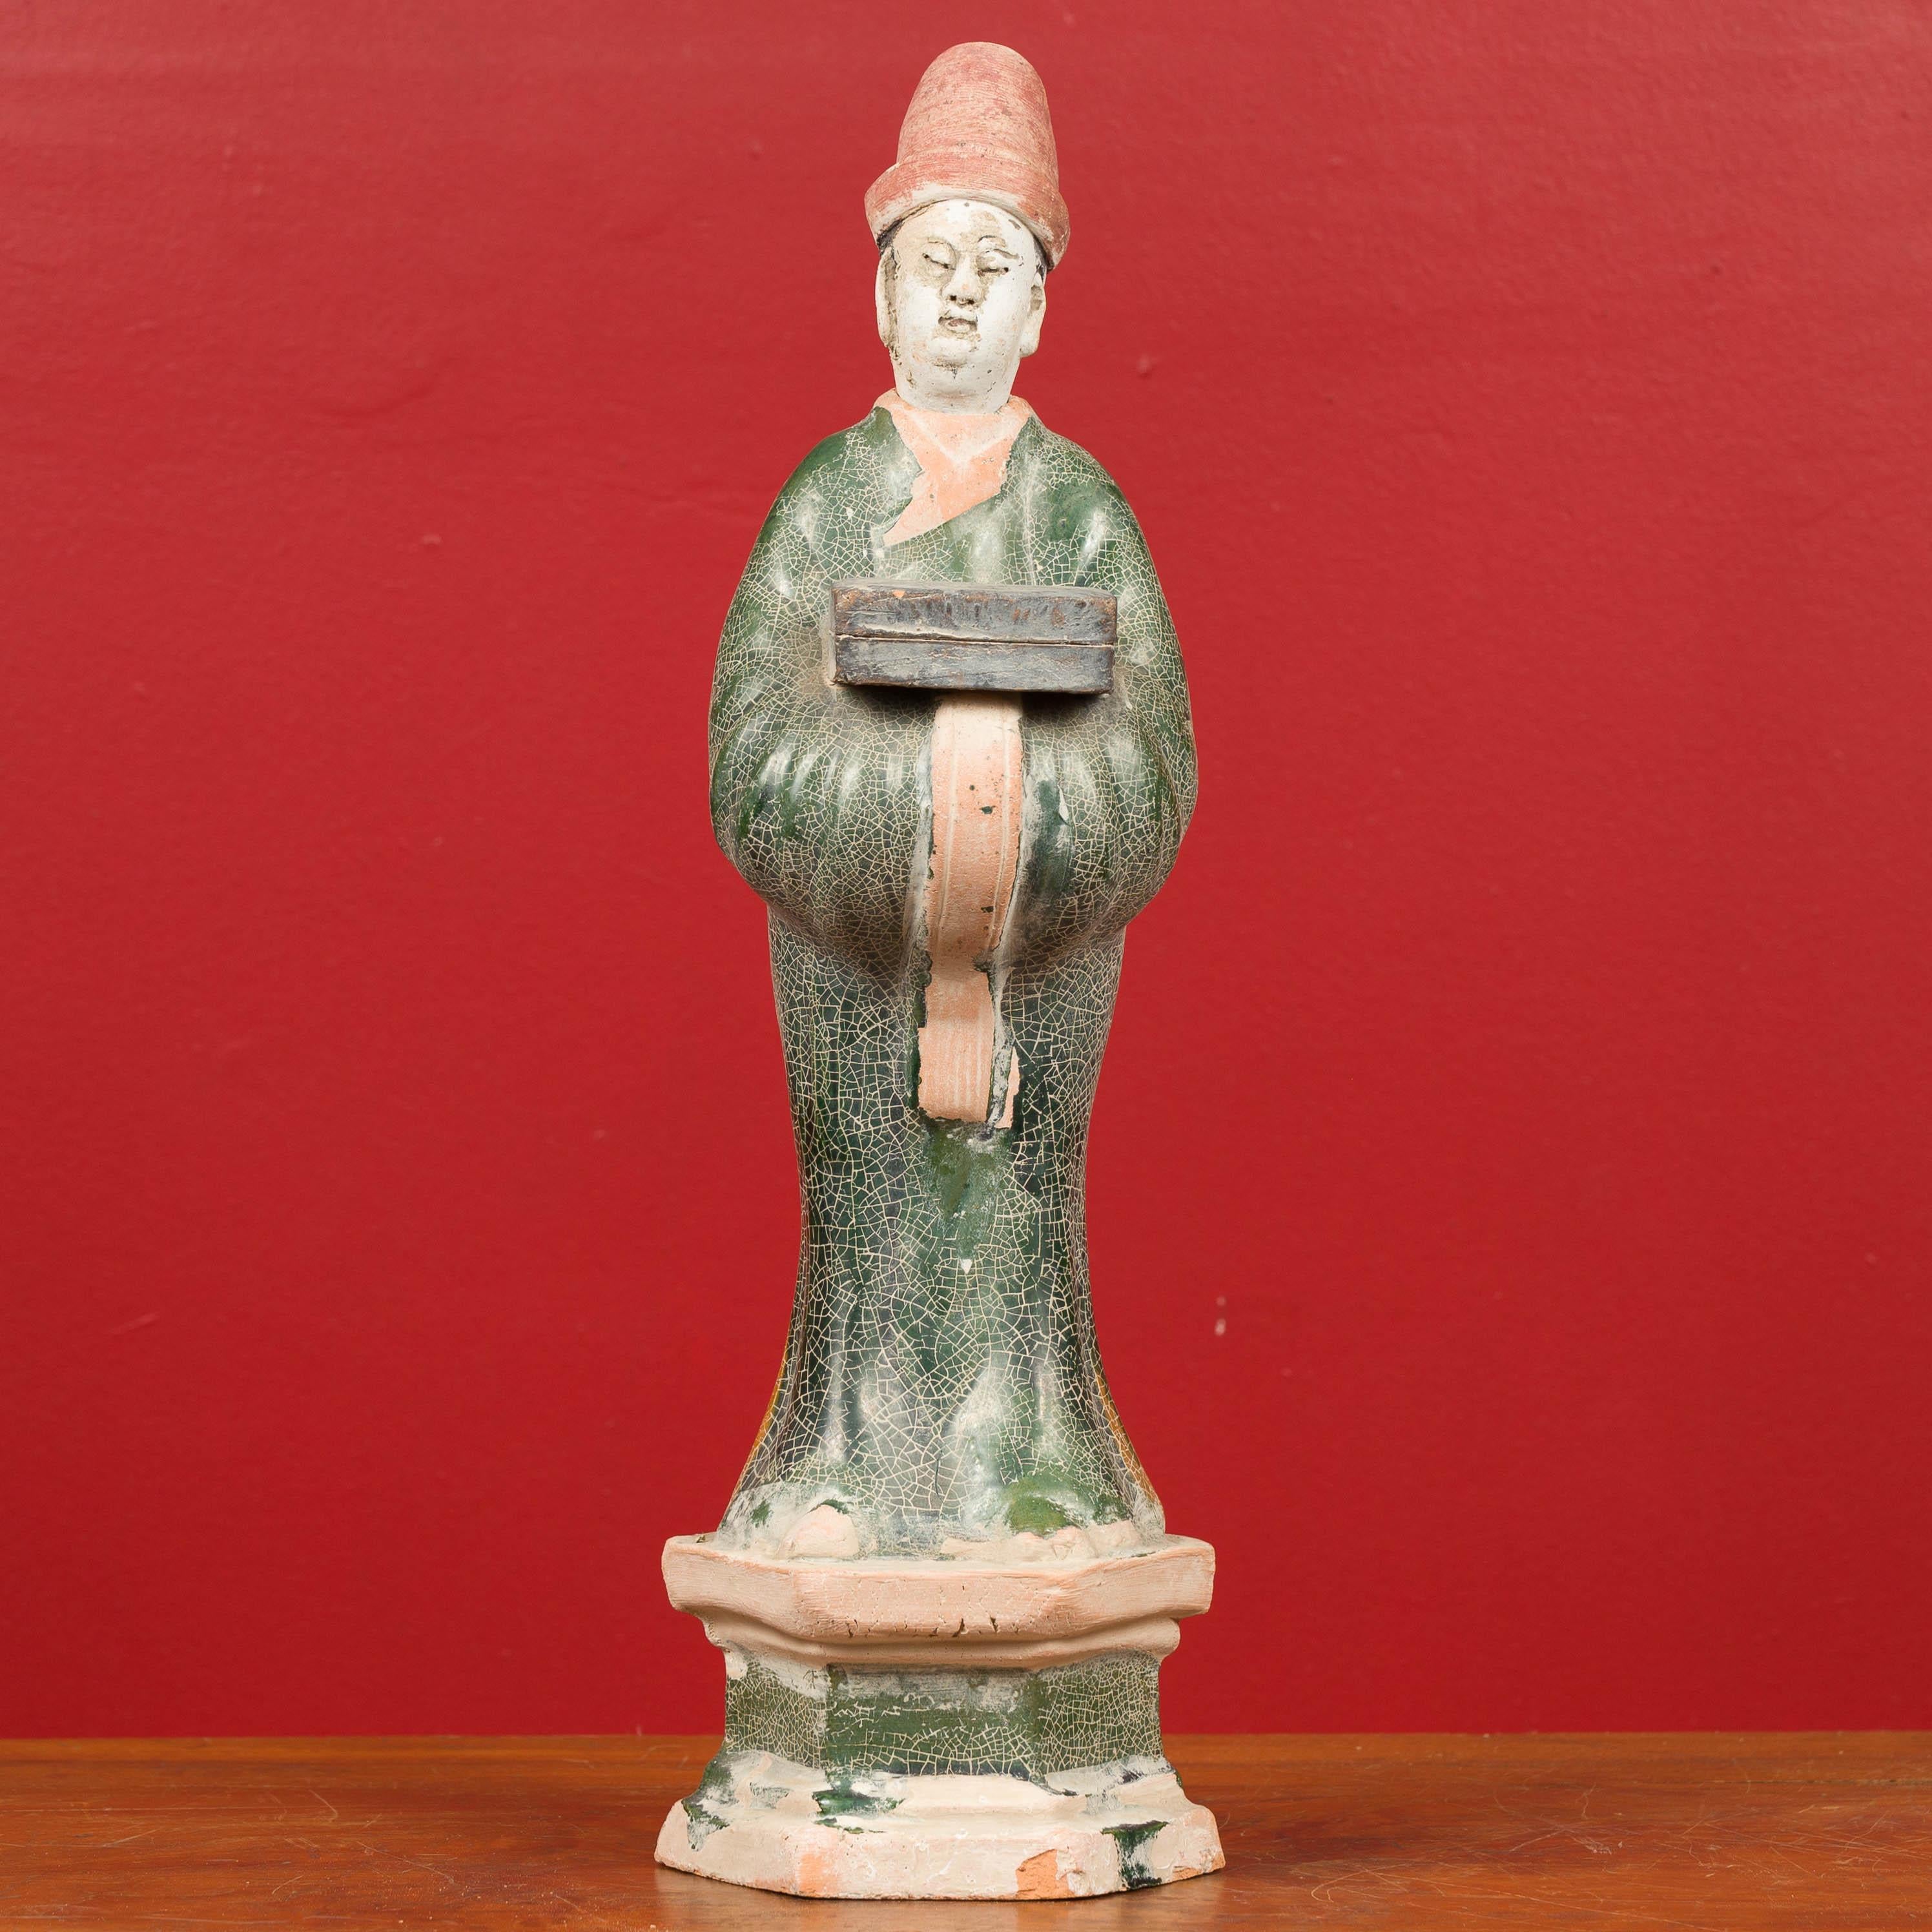 Chinese Ming Dynasty 17th Century Glazed Terracotta Statue of an Official Holding a Box